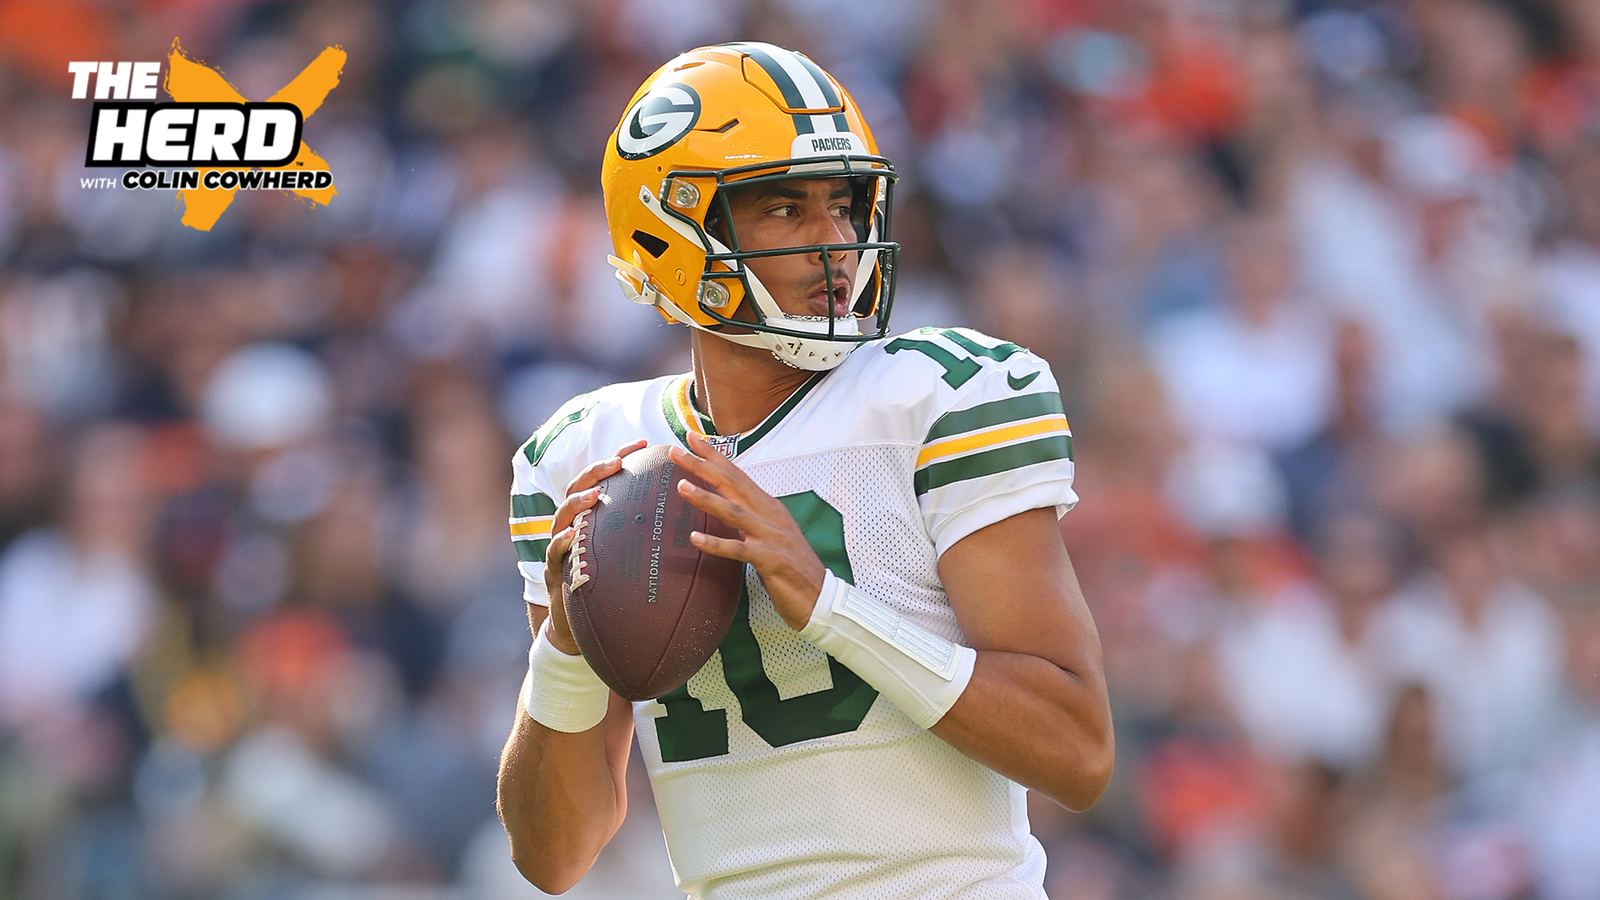 Have Packers found their next franchise QB in Jordan Love? 